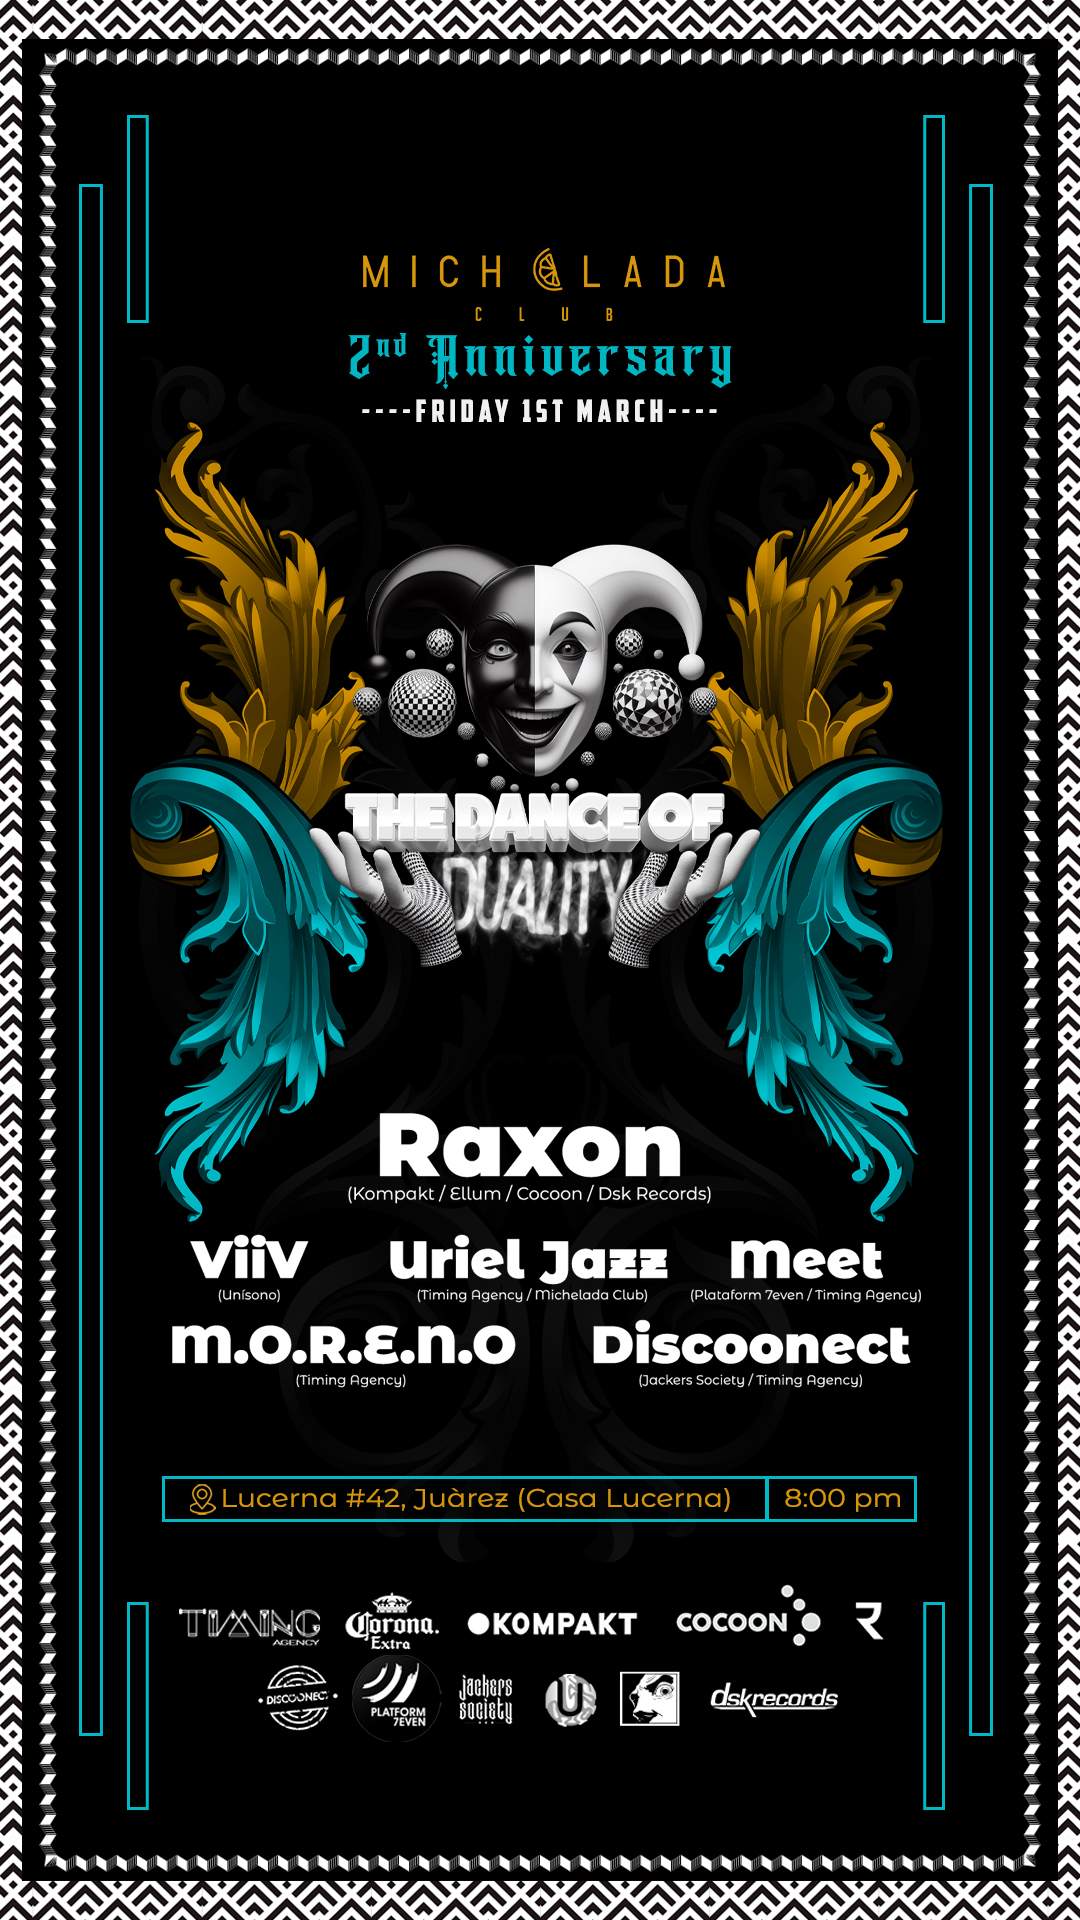 ¨THE DANCE OF DUALITY¨ WITH Raxon. 2ND ANIVERSSARY, MICHELADA CLUB - フライヤー表